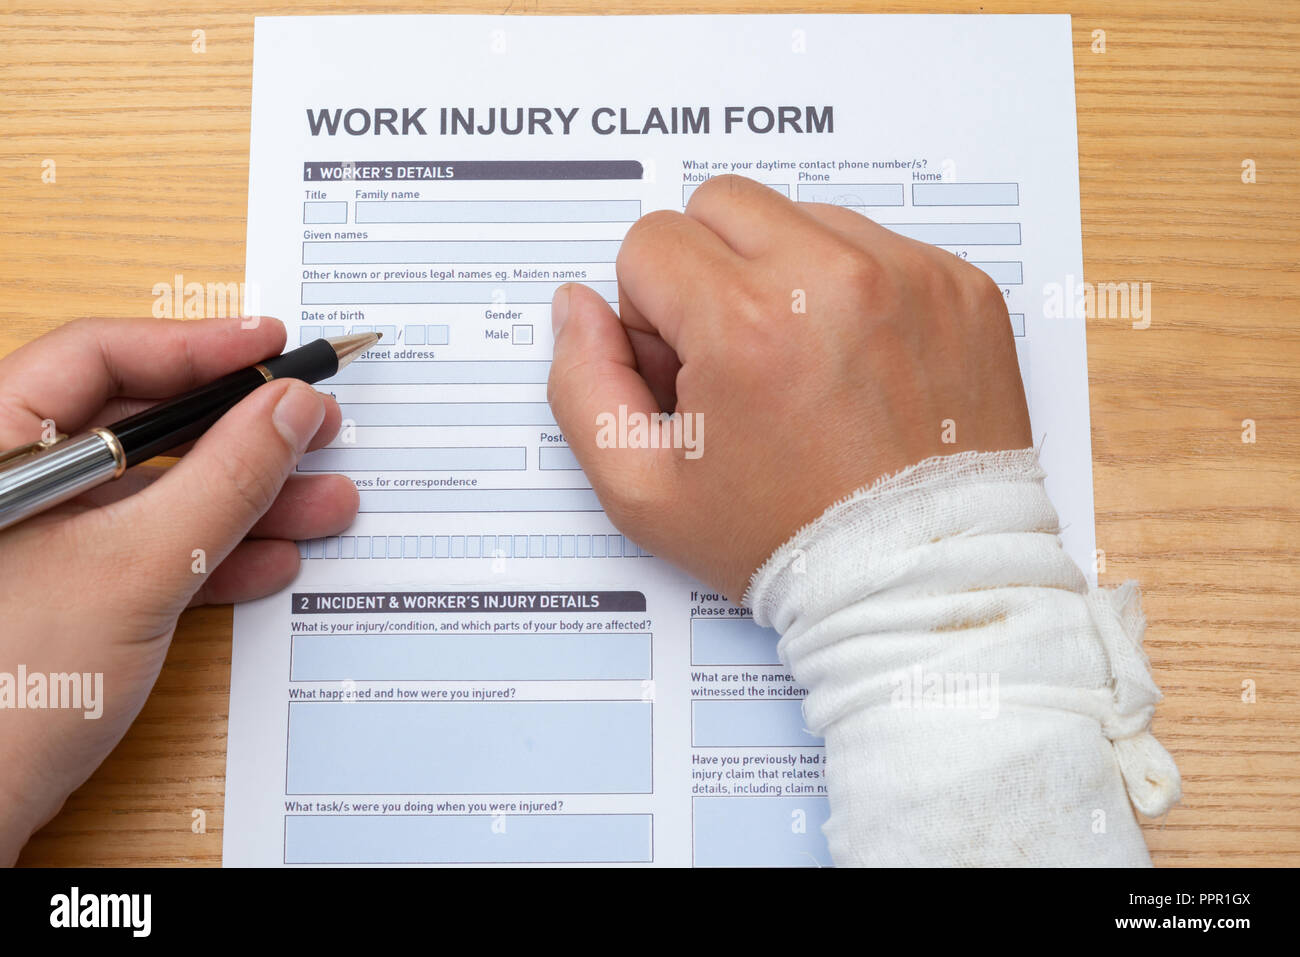 injury up claim filling a form wrapped ... work hand with a